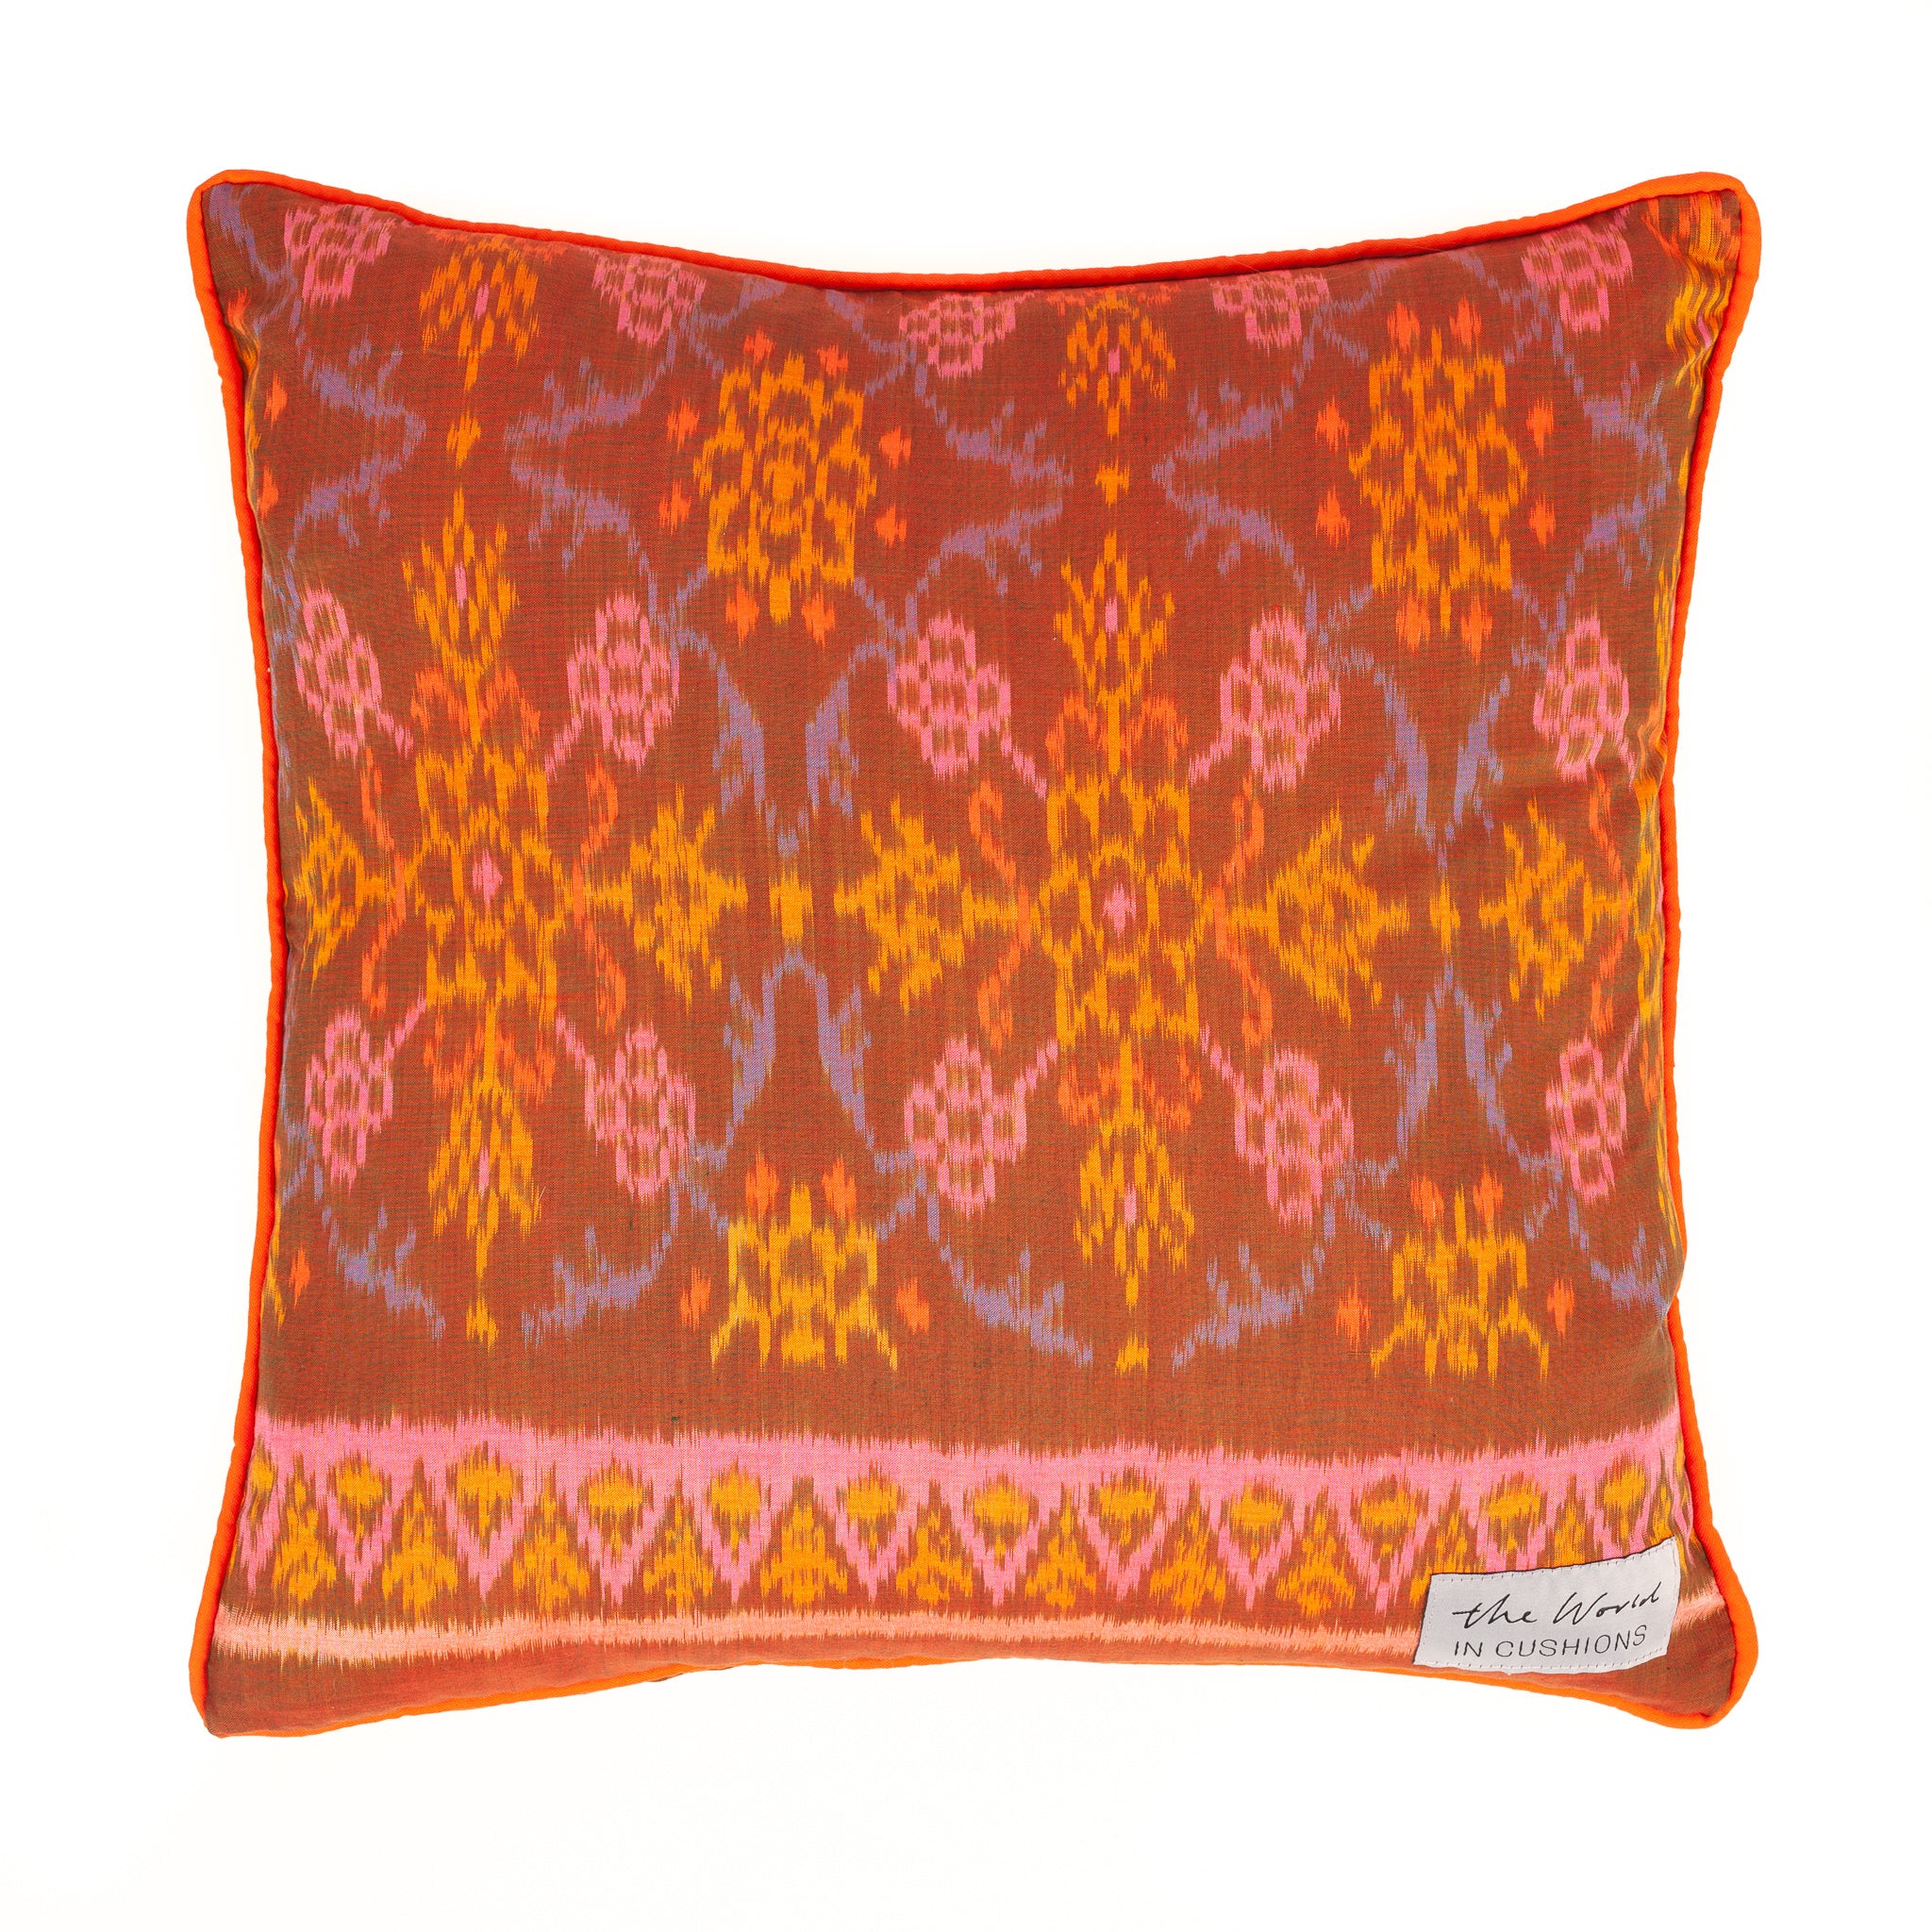 Orange, Pink and Pale Blue Ikat Square Scatter Cushion from Bali, Indonesia - BACK